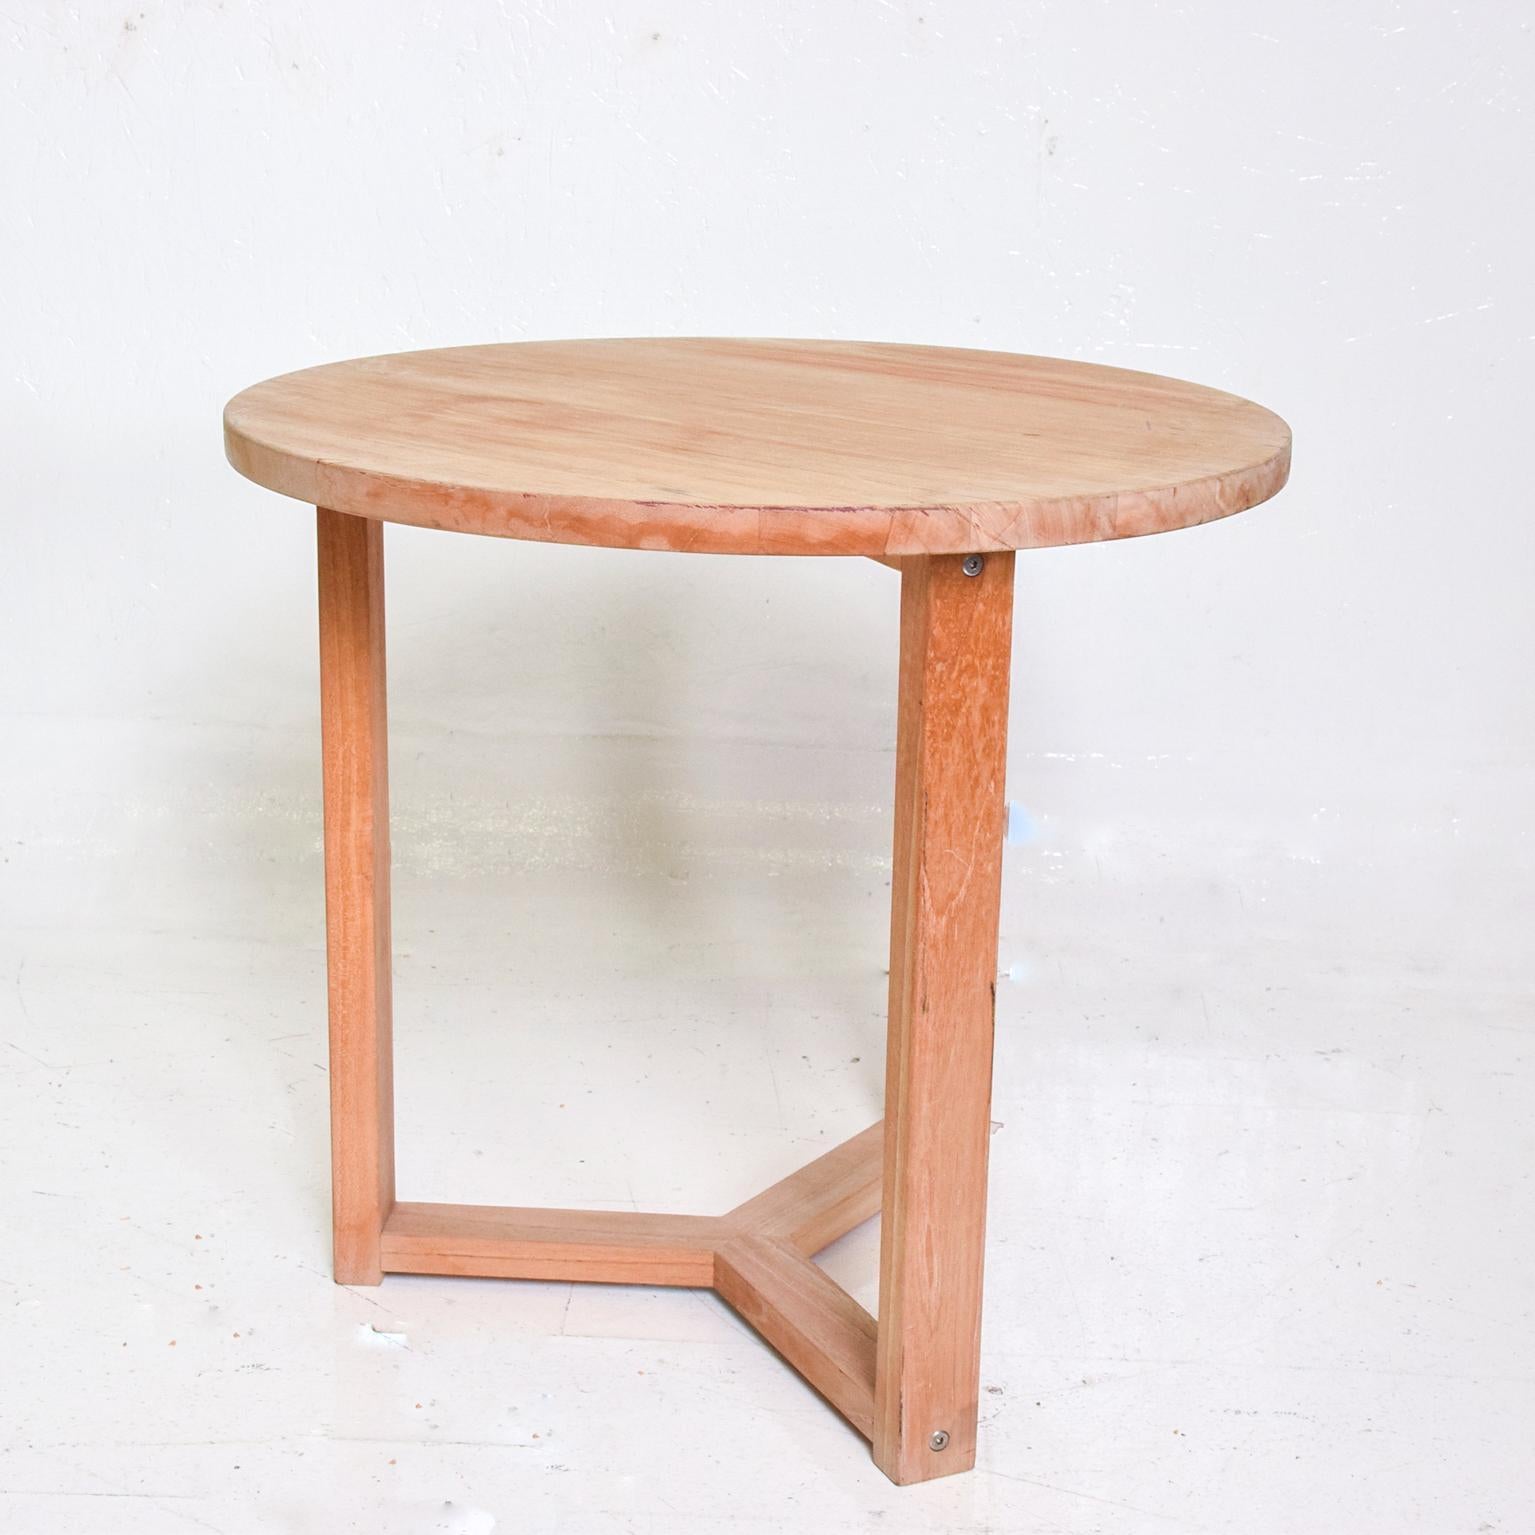 For your consideration, a modern teak round occasional table. It can be taken apart for safe and easy shipping. Dimensions: 21 3/4